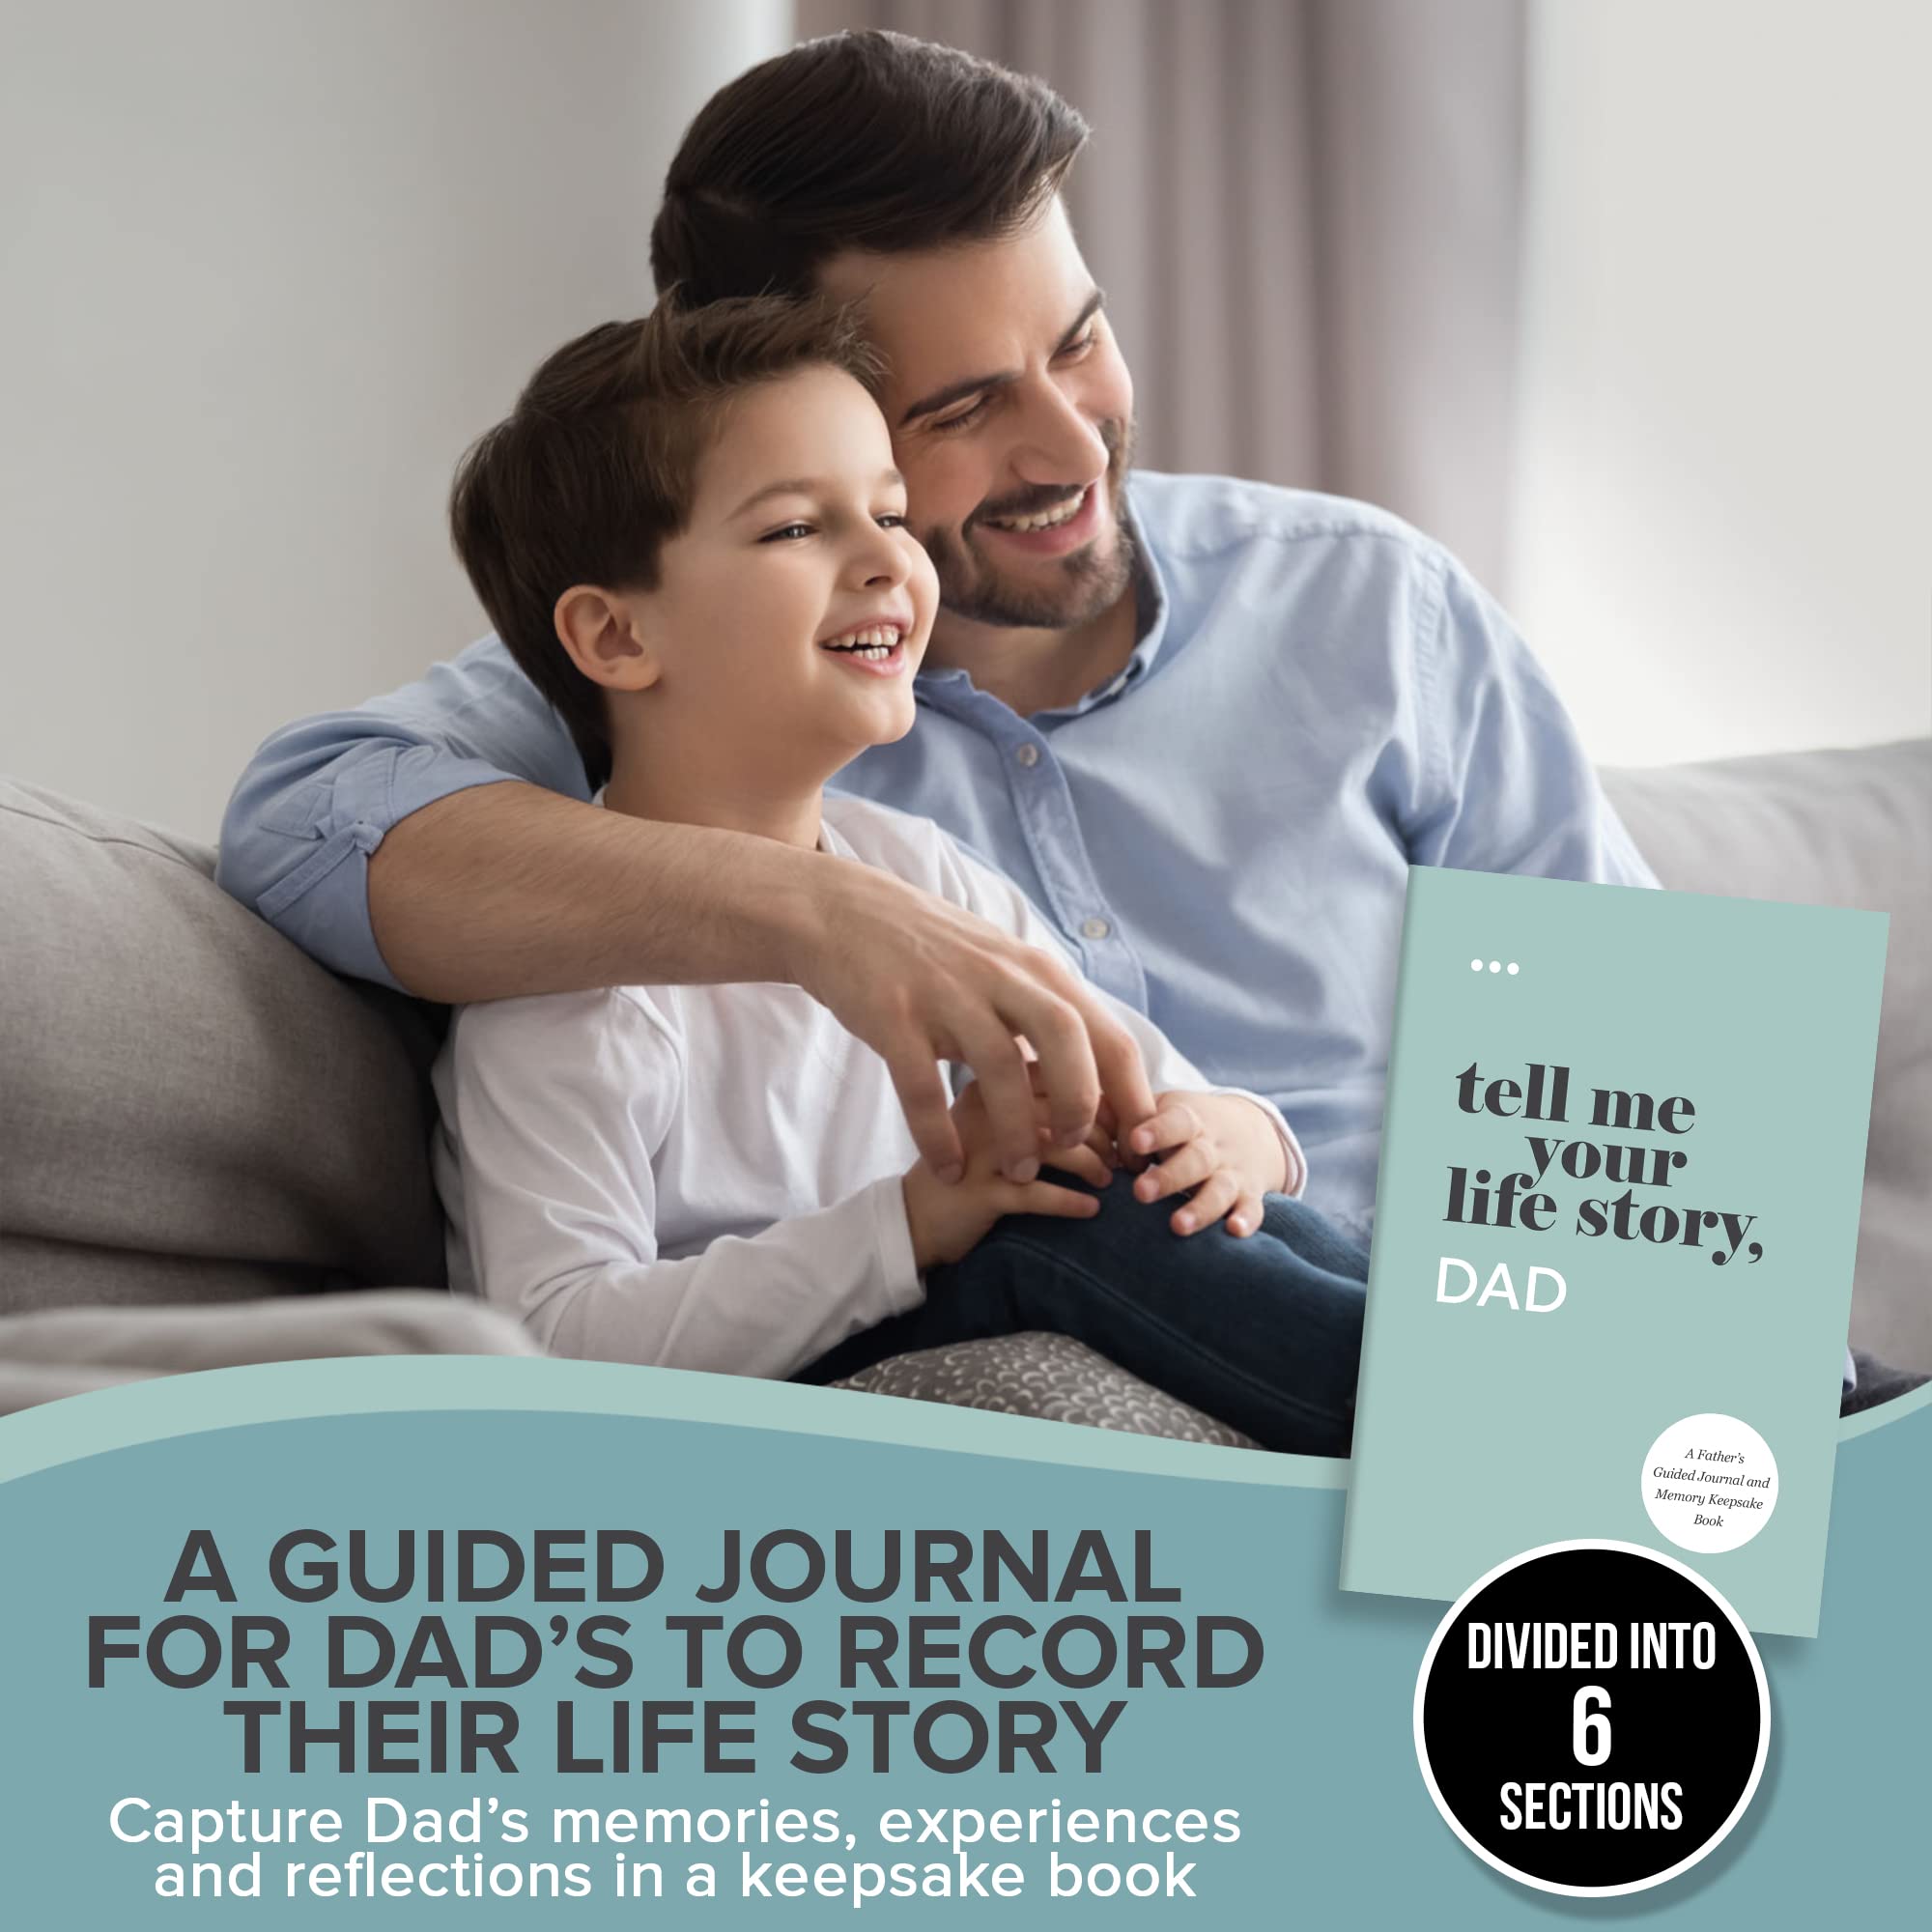 Tell Me Your Life Story, Dad: A Father’s Guided Journal and Memory Keepsake Book (Tell Me Your Life Story® Series Books)